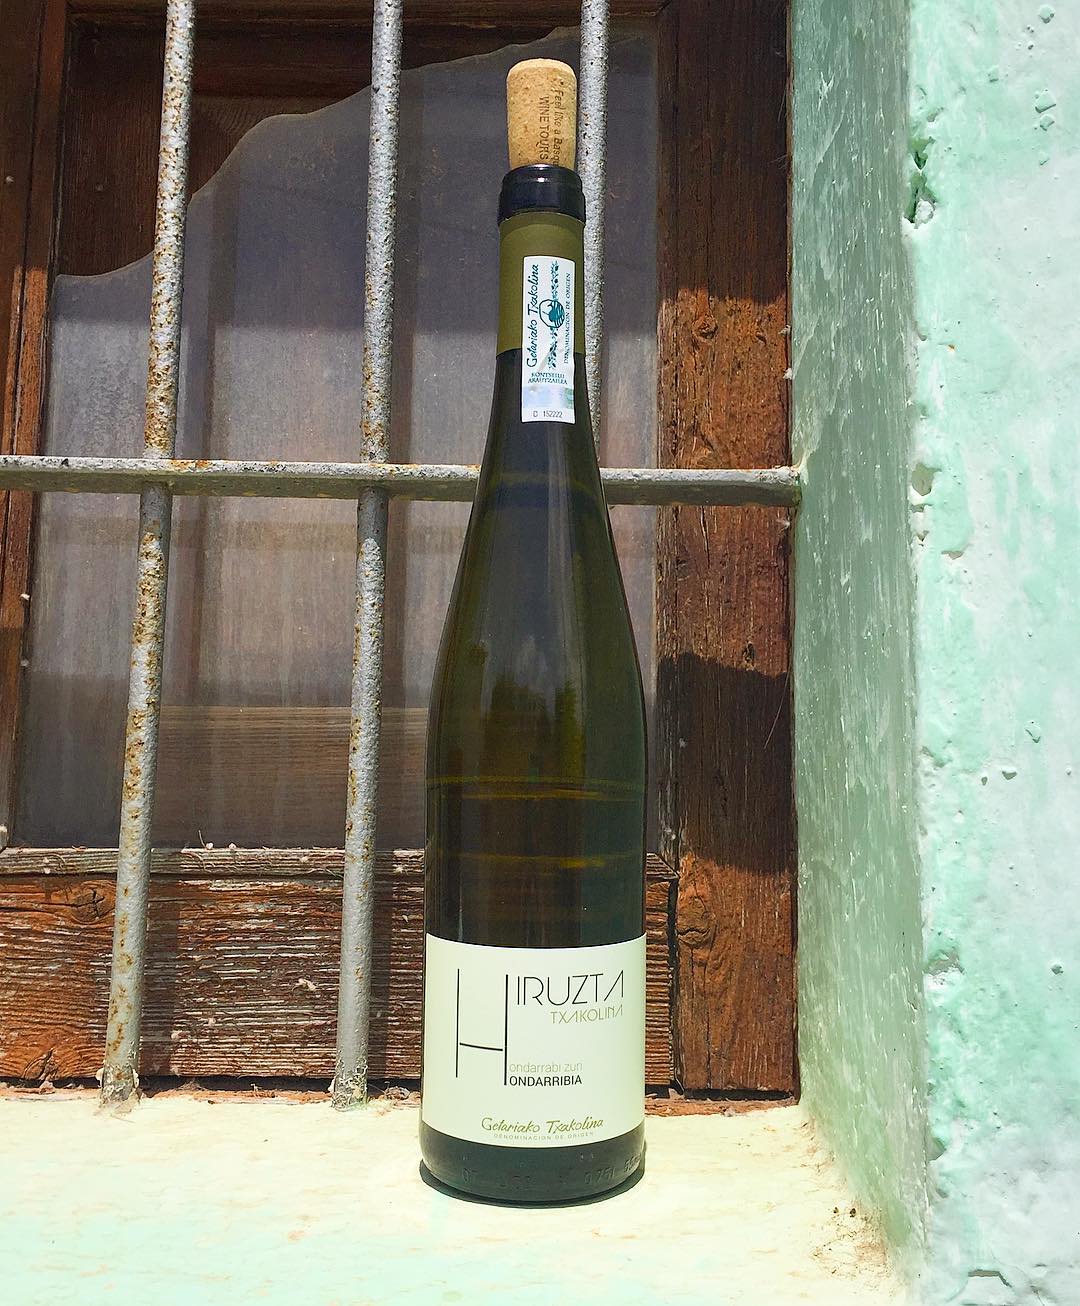 A new day, a new wine. Today we refresh with Hiruzta Txakolina. A combination of classicism and modernity. Balanced, fresh, with a well integrated acidity. When poured from a bit of height, as is typical for serving txakoli, the presence of tiny carbonation bubbles is revealed (aguja). @vinoycoibiza @hiruztabodega #vinoyco #ibiza2017 #wineshop #ibizawineshop #winelovers #txakoli #hotsummerdays #summerwine